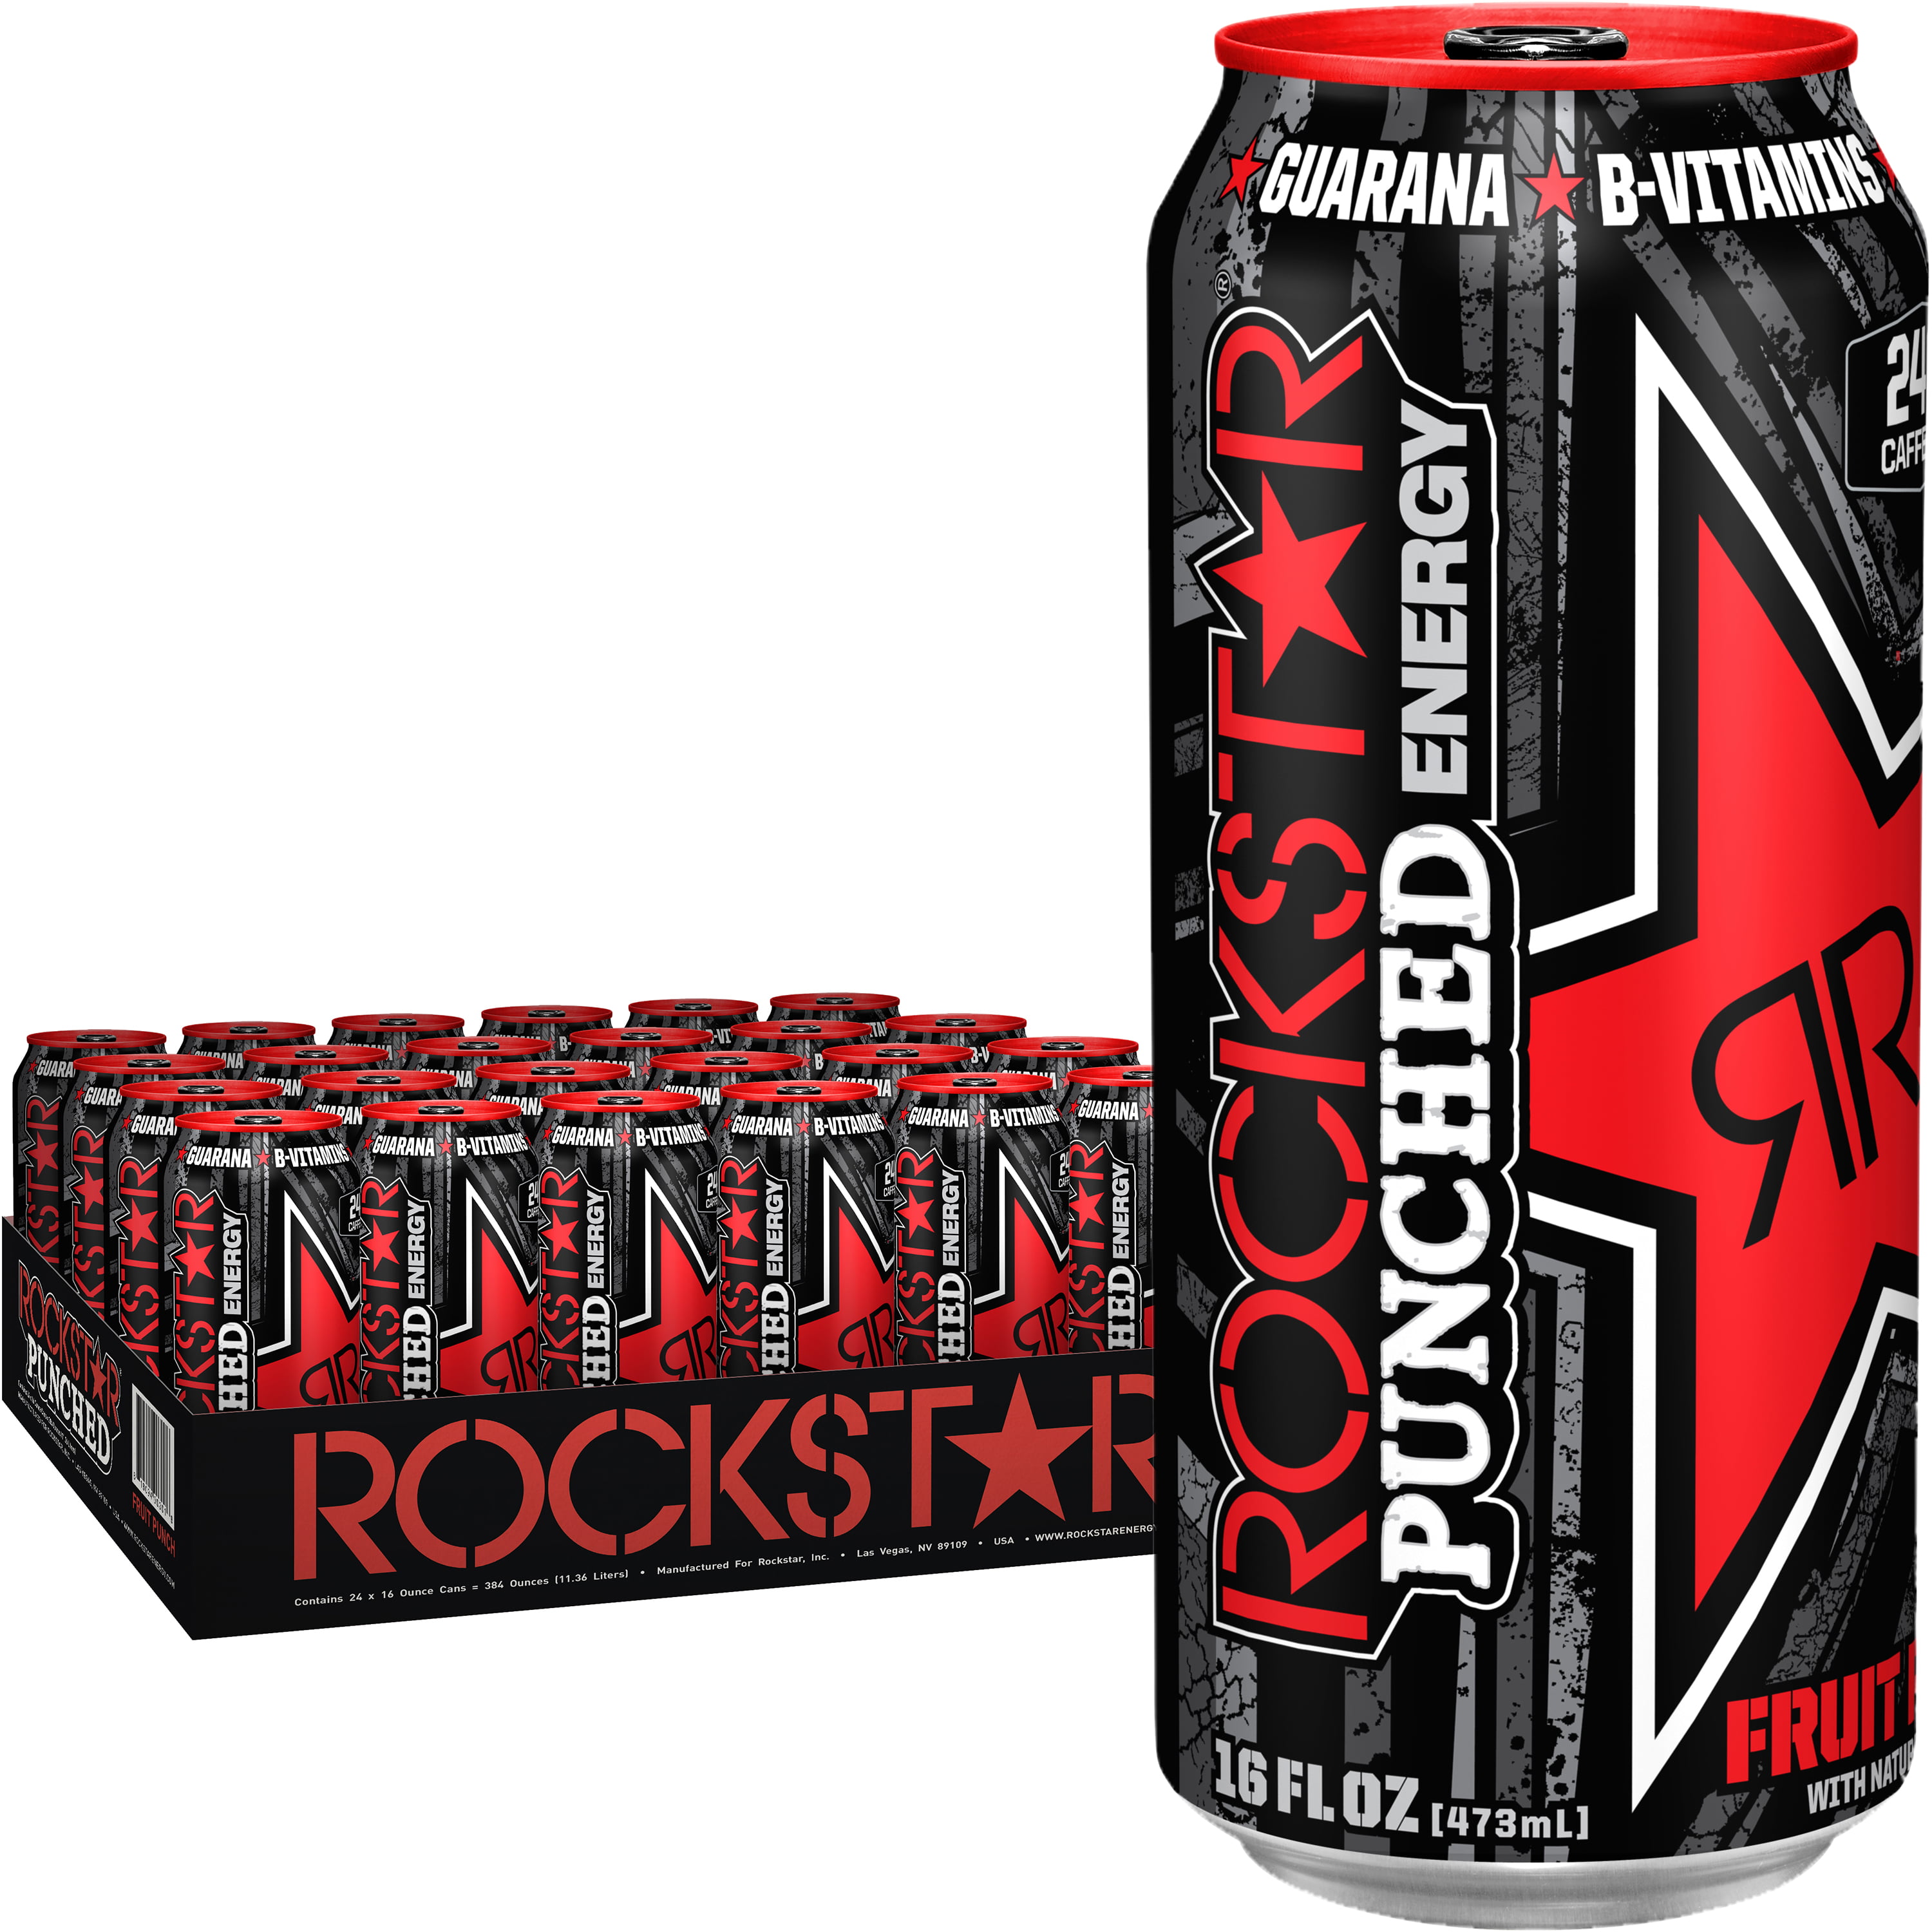 (24 Cans) Rockstar Punched Energy Drink, 16 fl oz ...